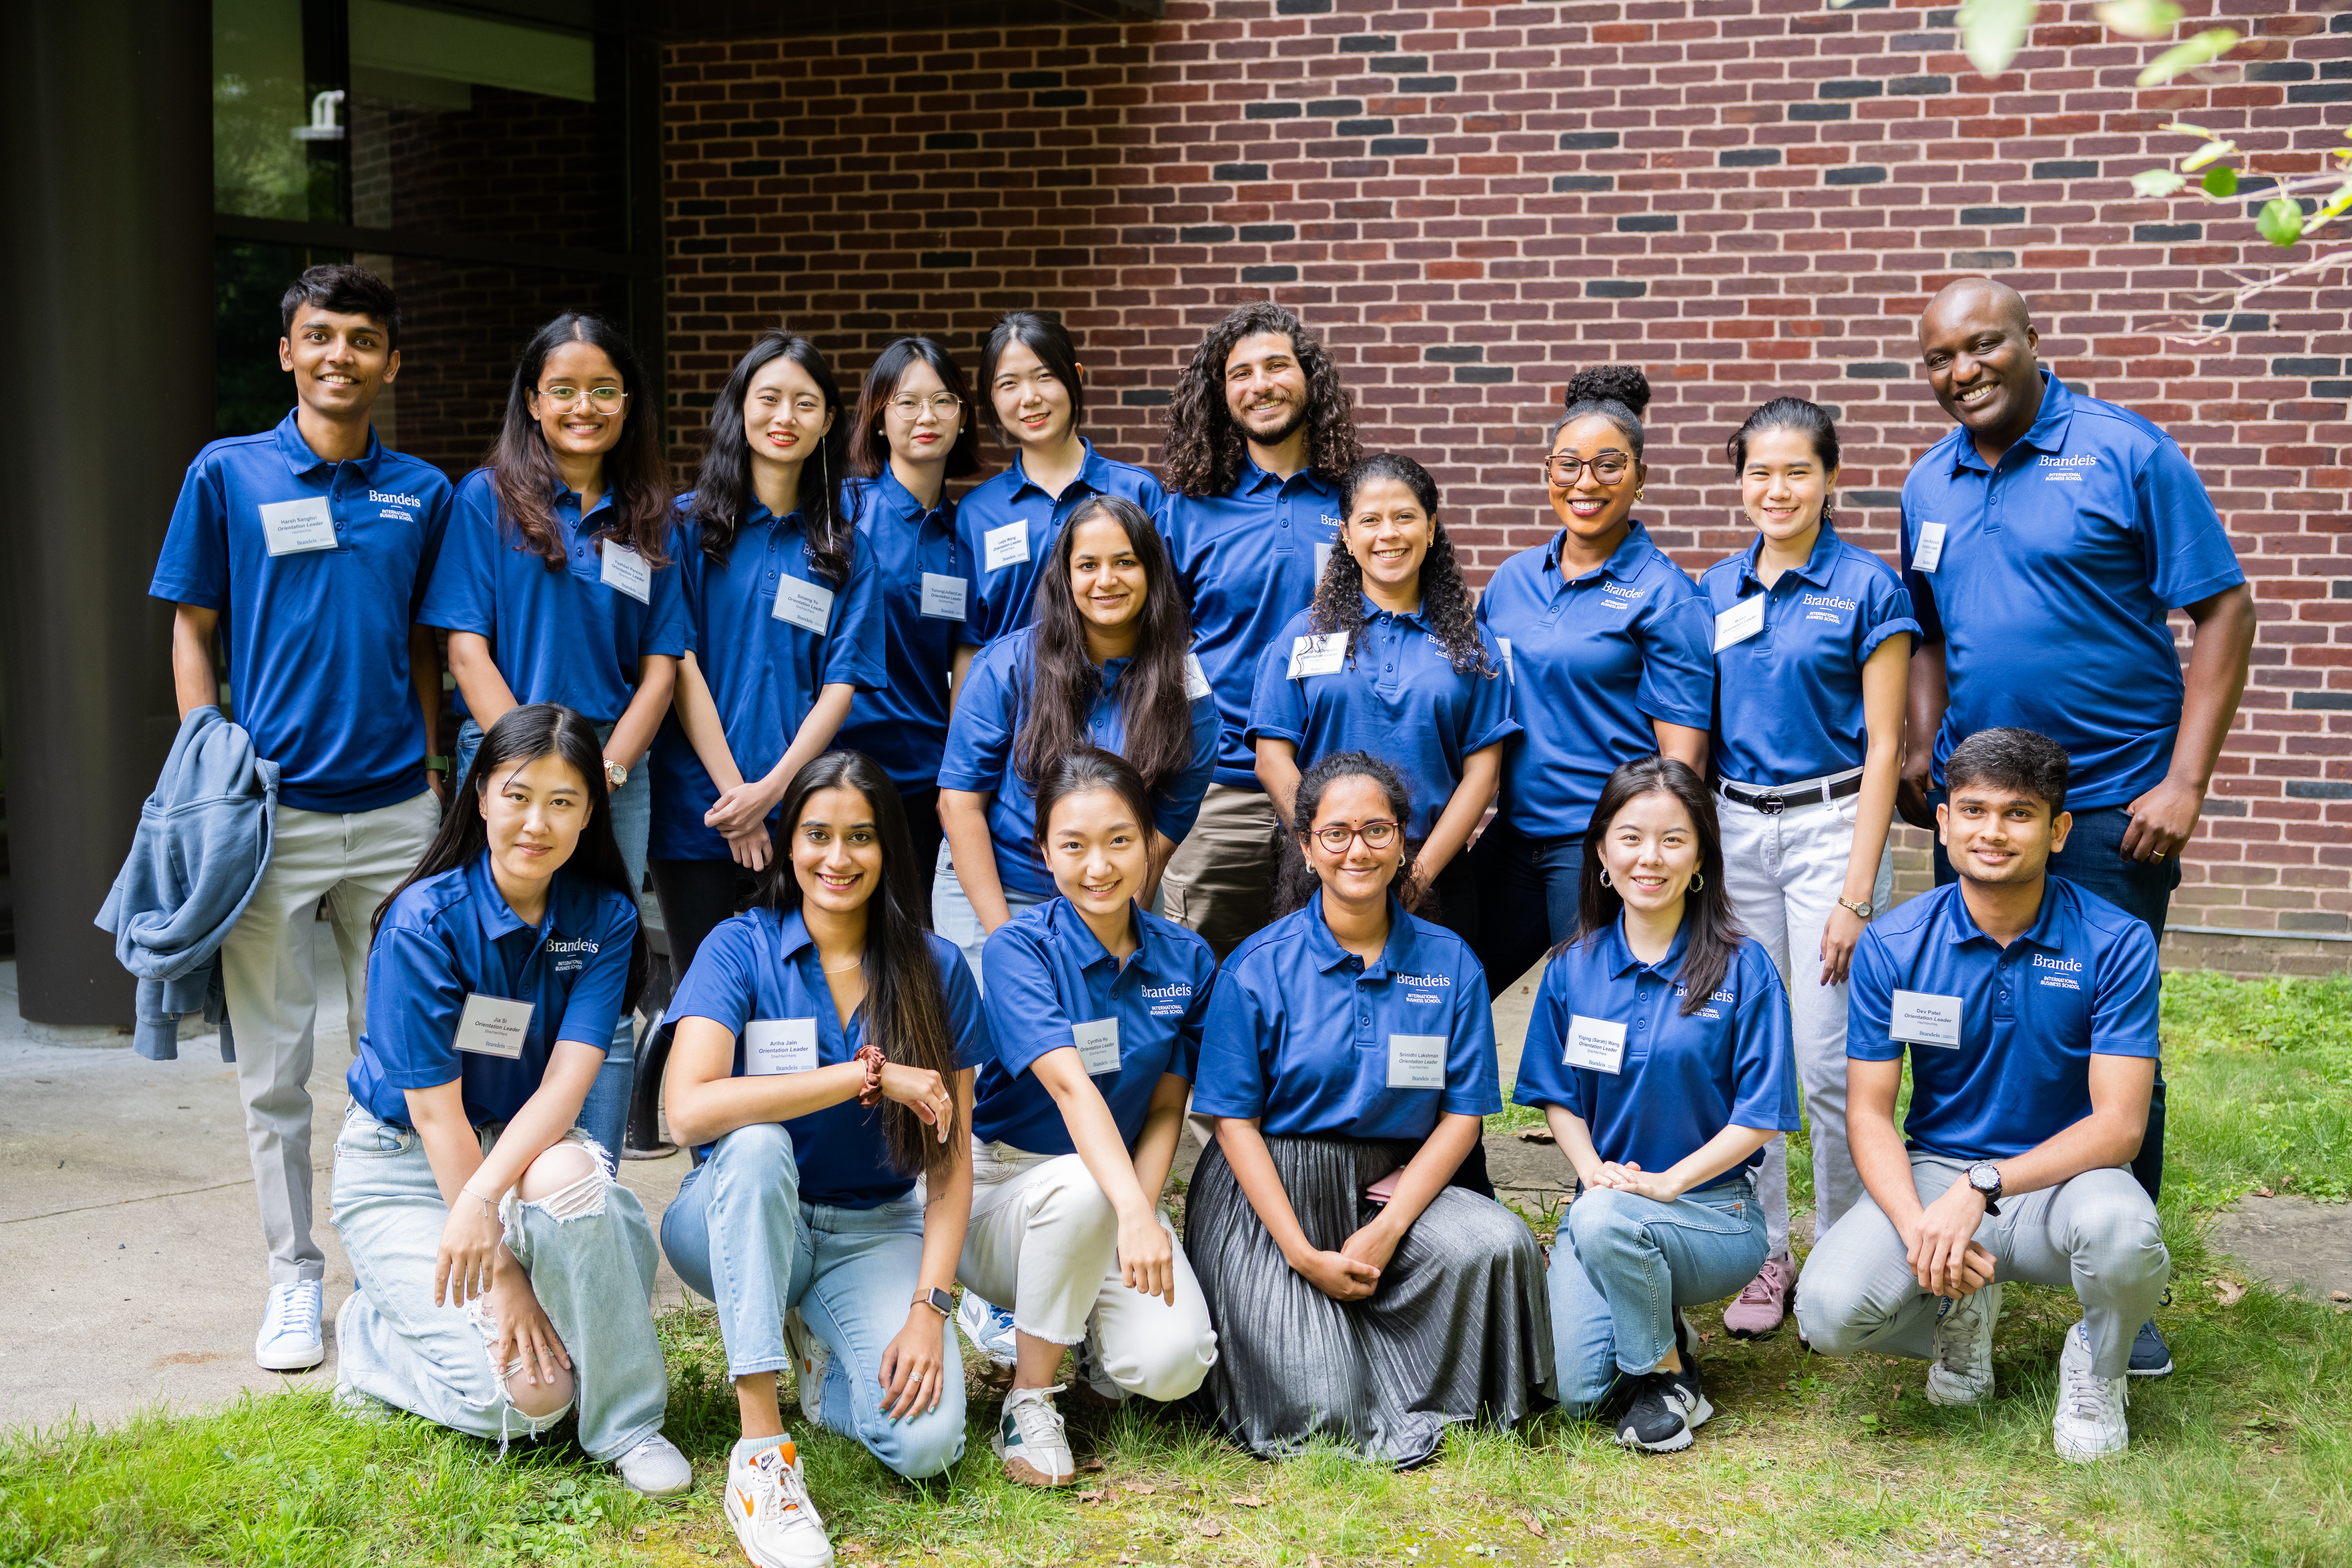 The Brandeis Business Orientation Leaders will help you feel right at home.